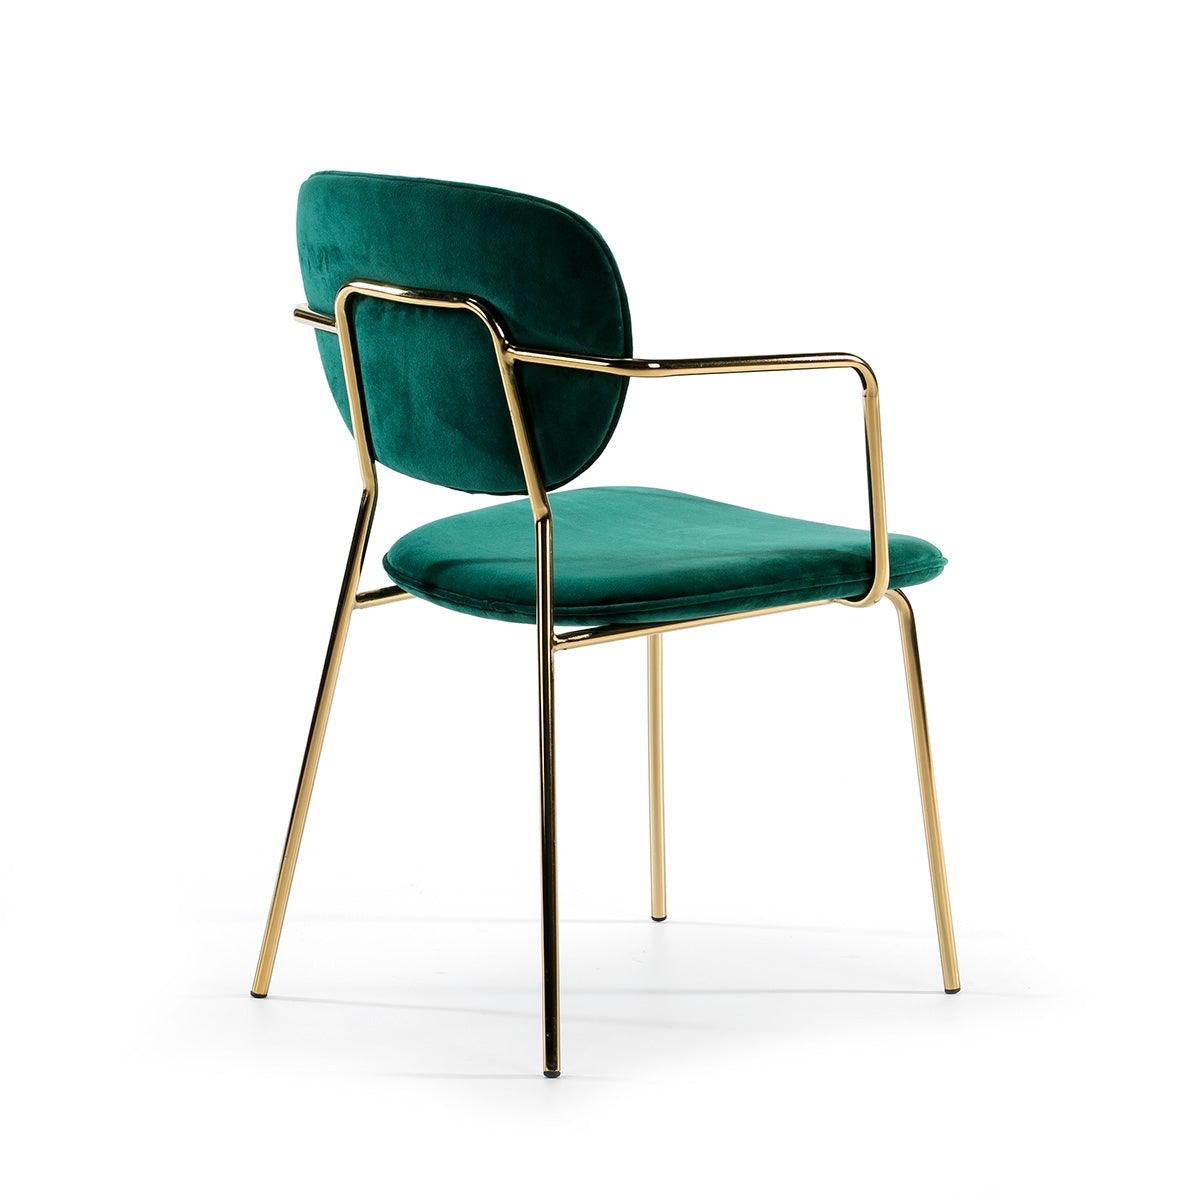 Gold Metal Chair W/Arms